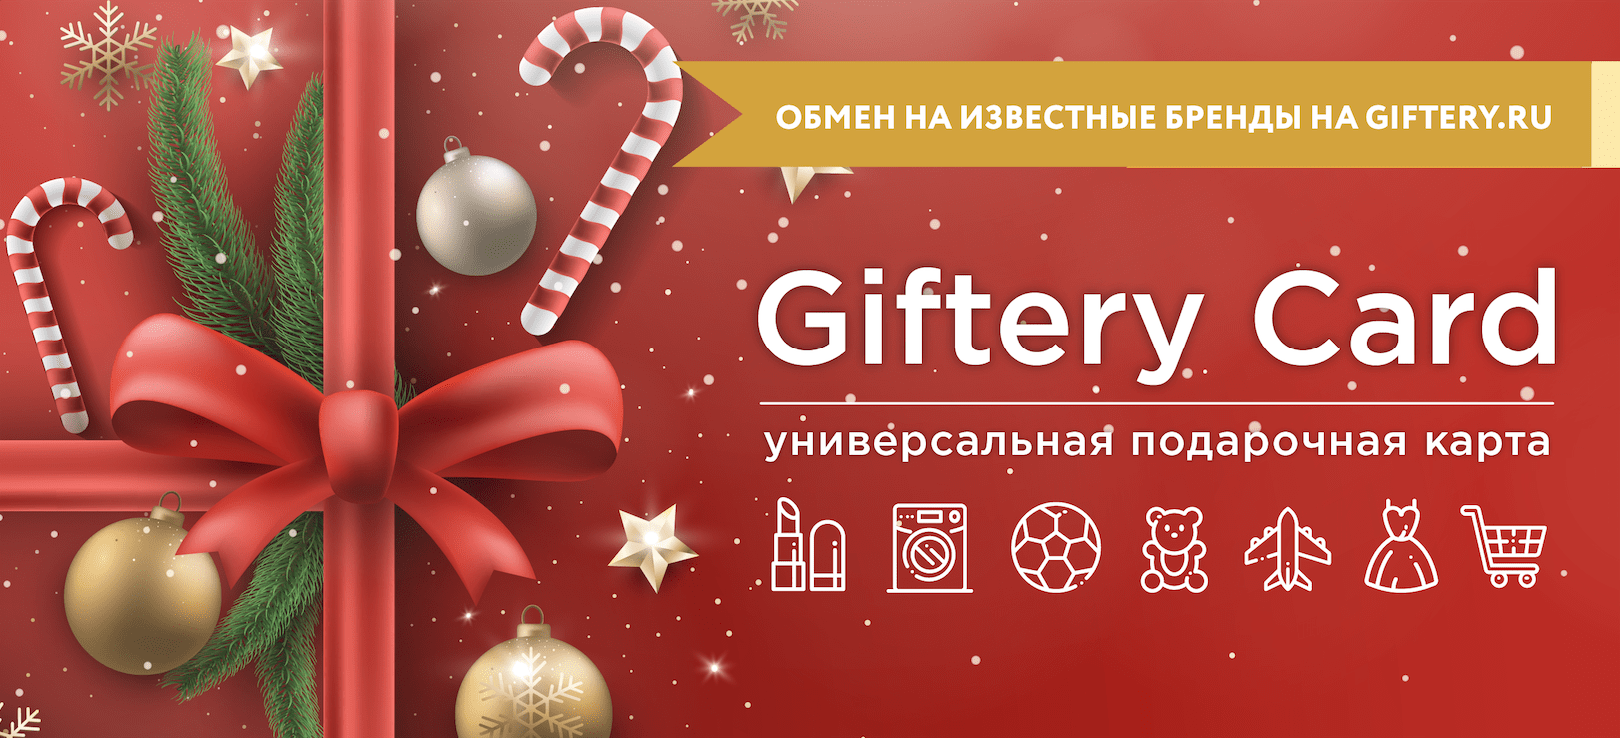 giftery digest min2